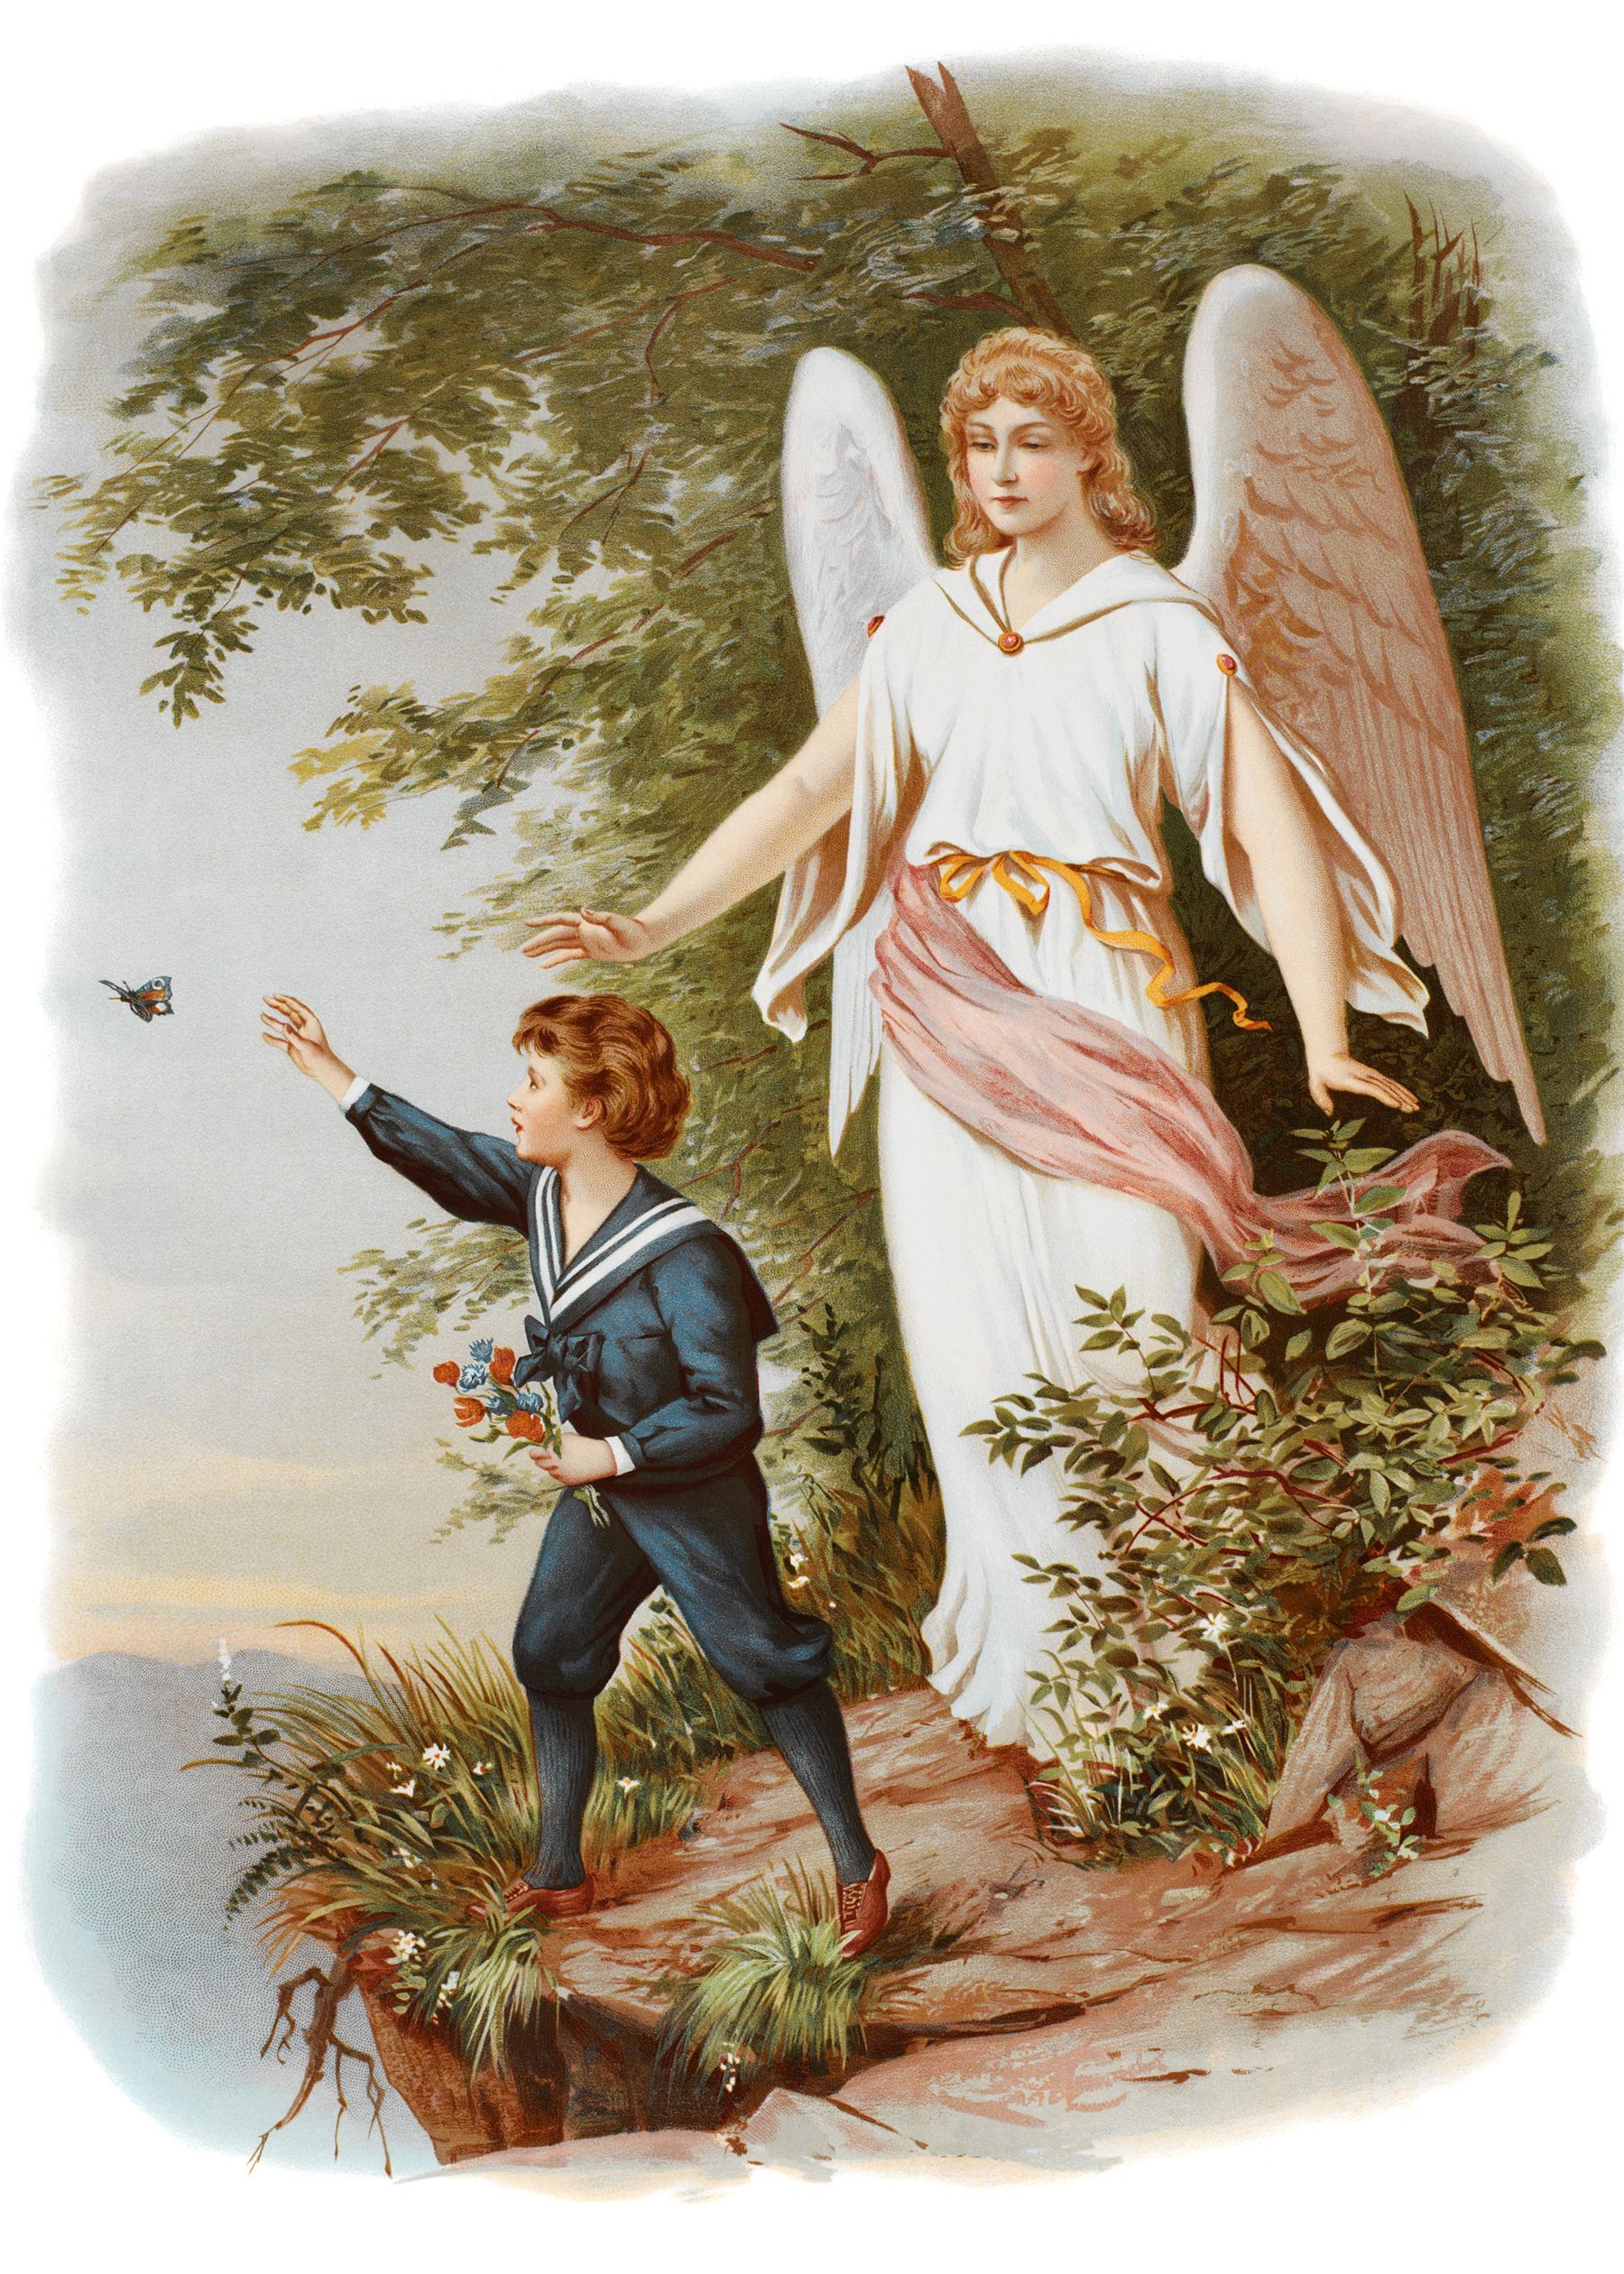 The Truth About Guardian Angels - Do They Exist Or Are They A Myth?